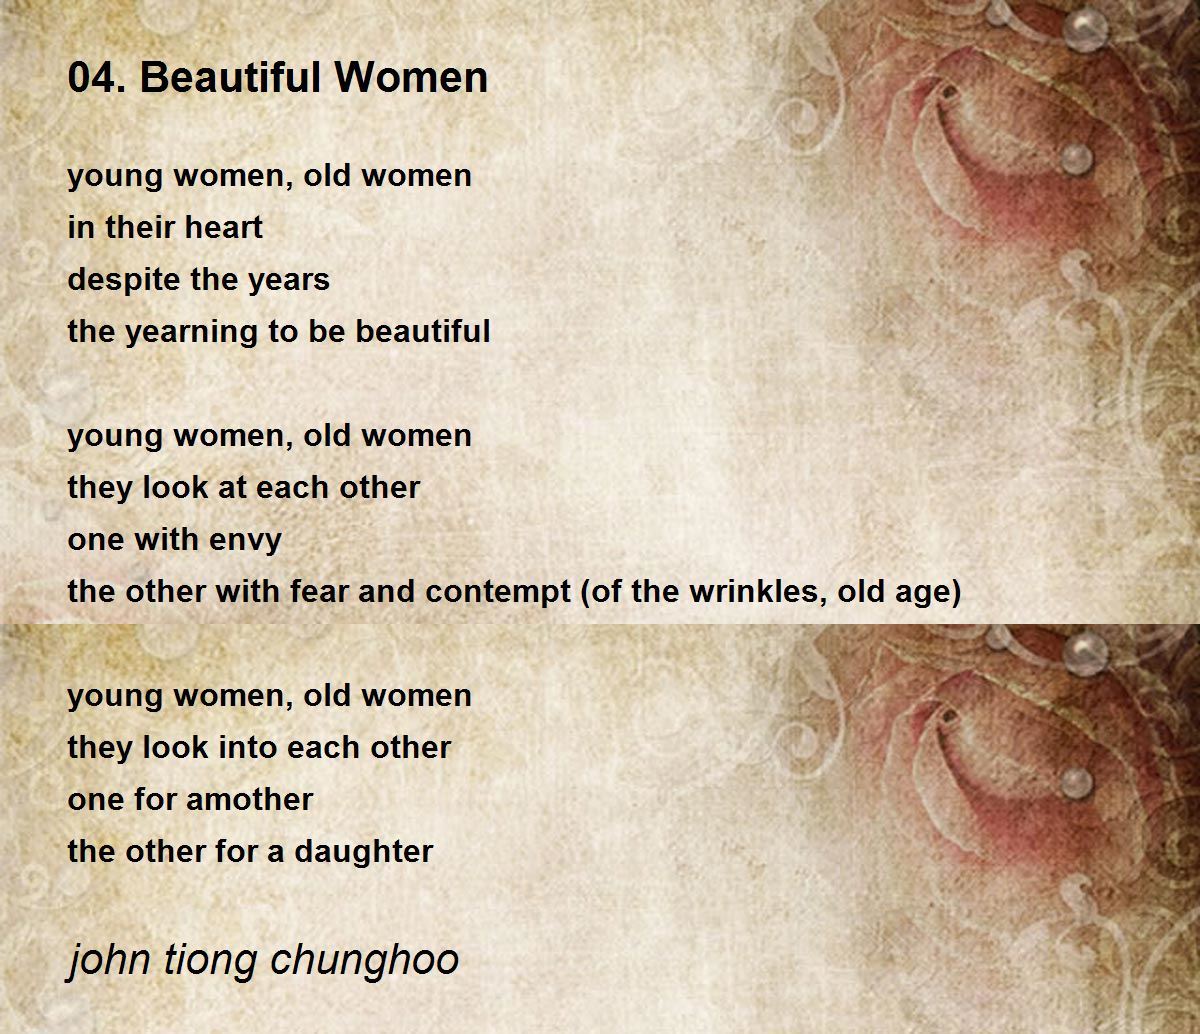 Poem Dedicated To A Powerful Woman 61